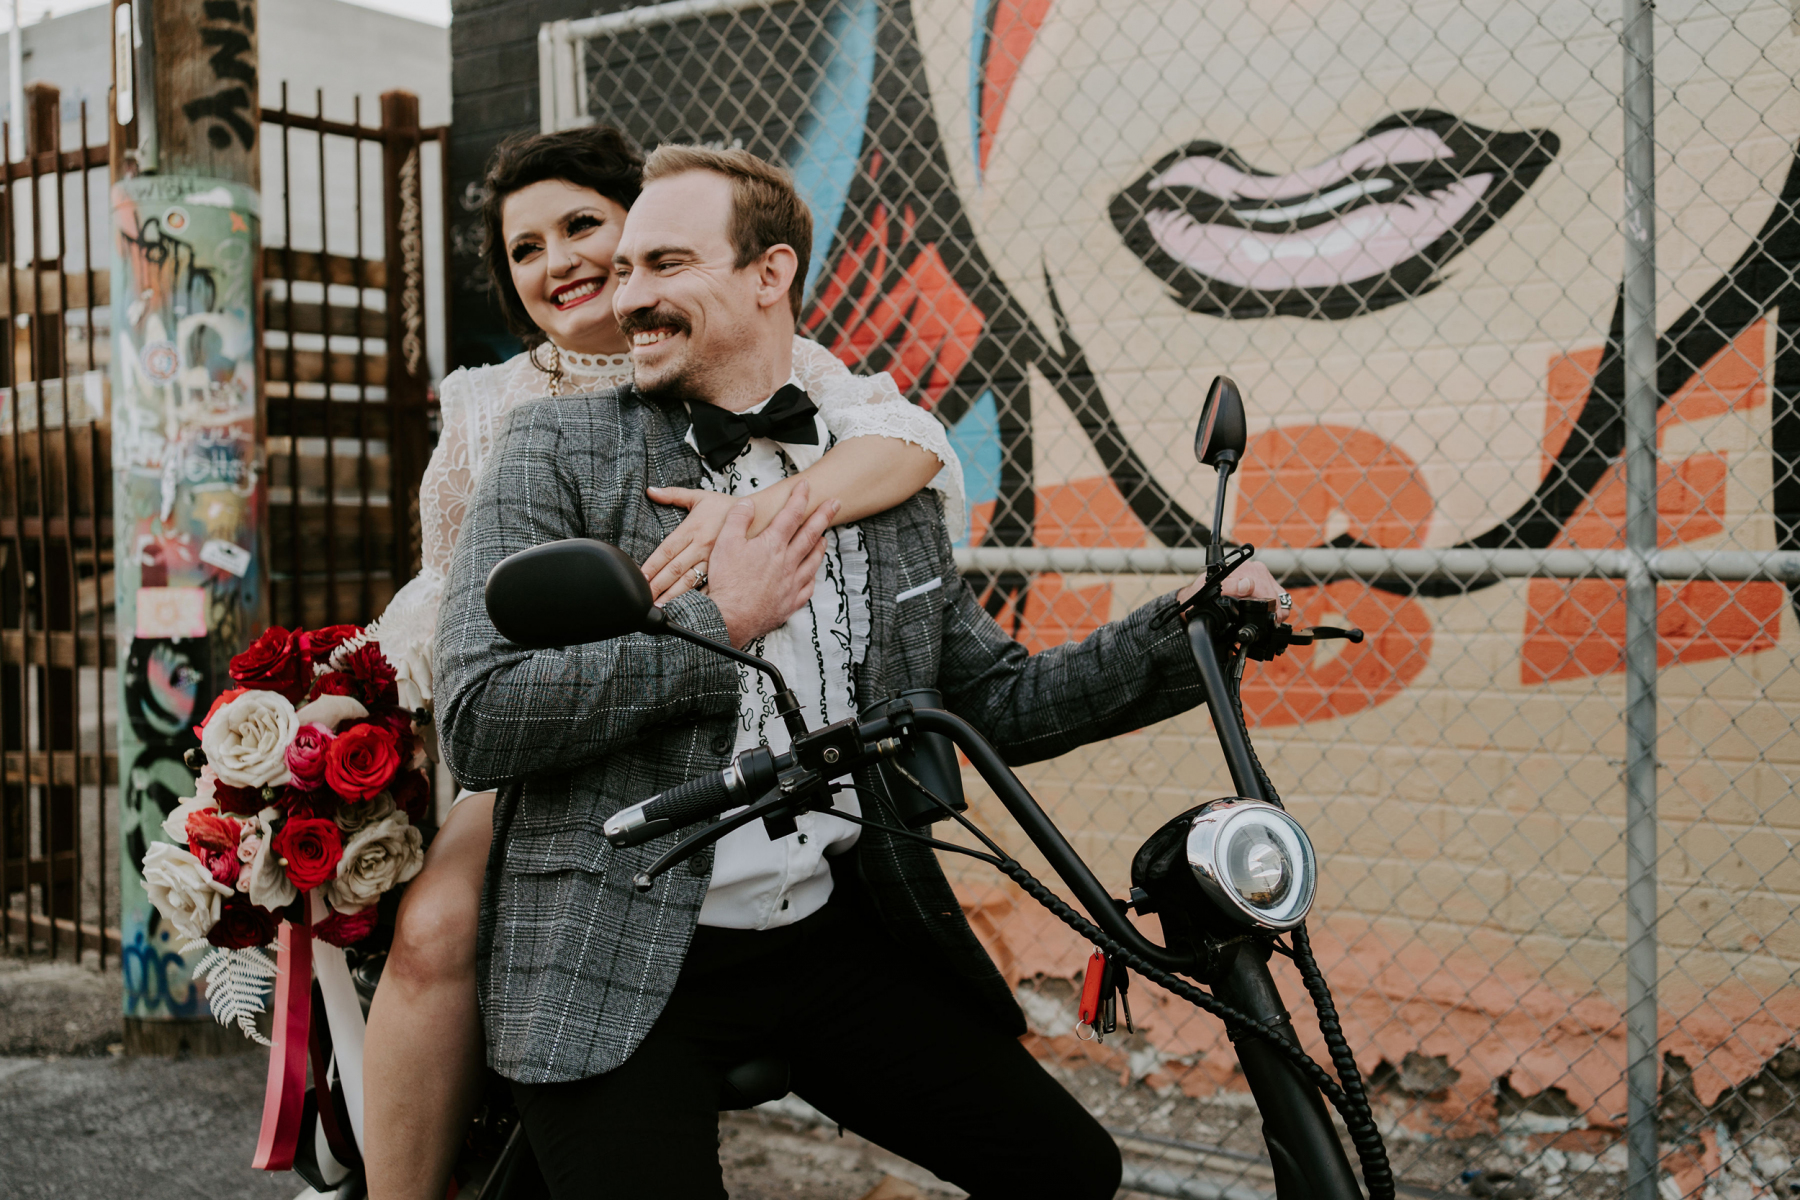 Newlywed couple riding on a moped in alley.